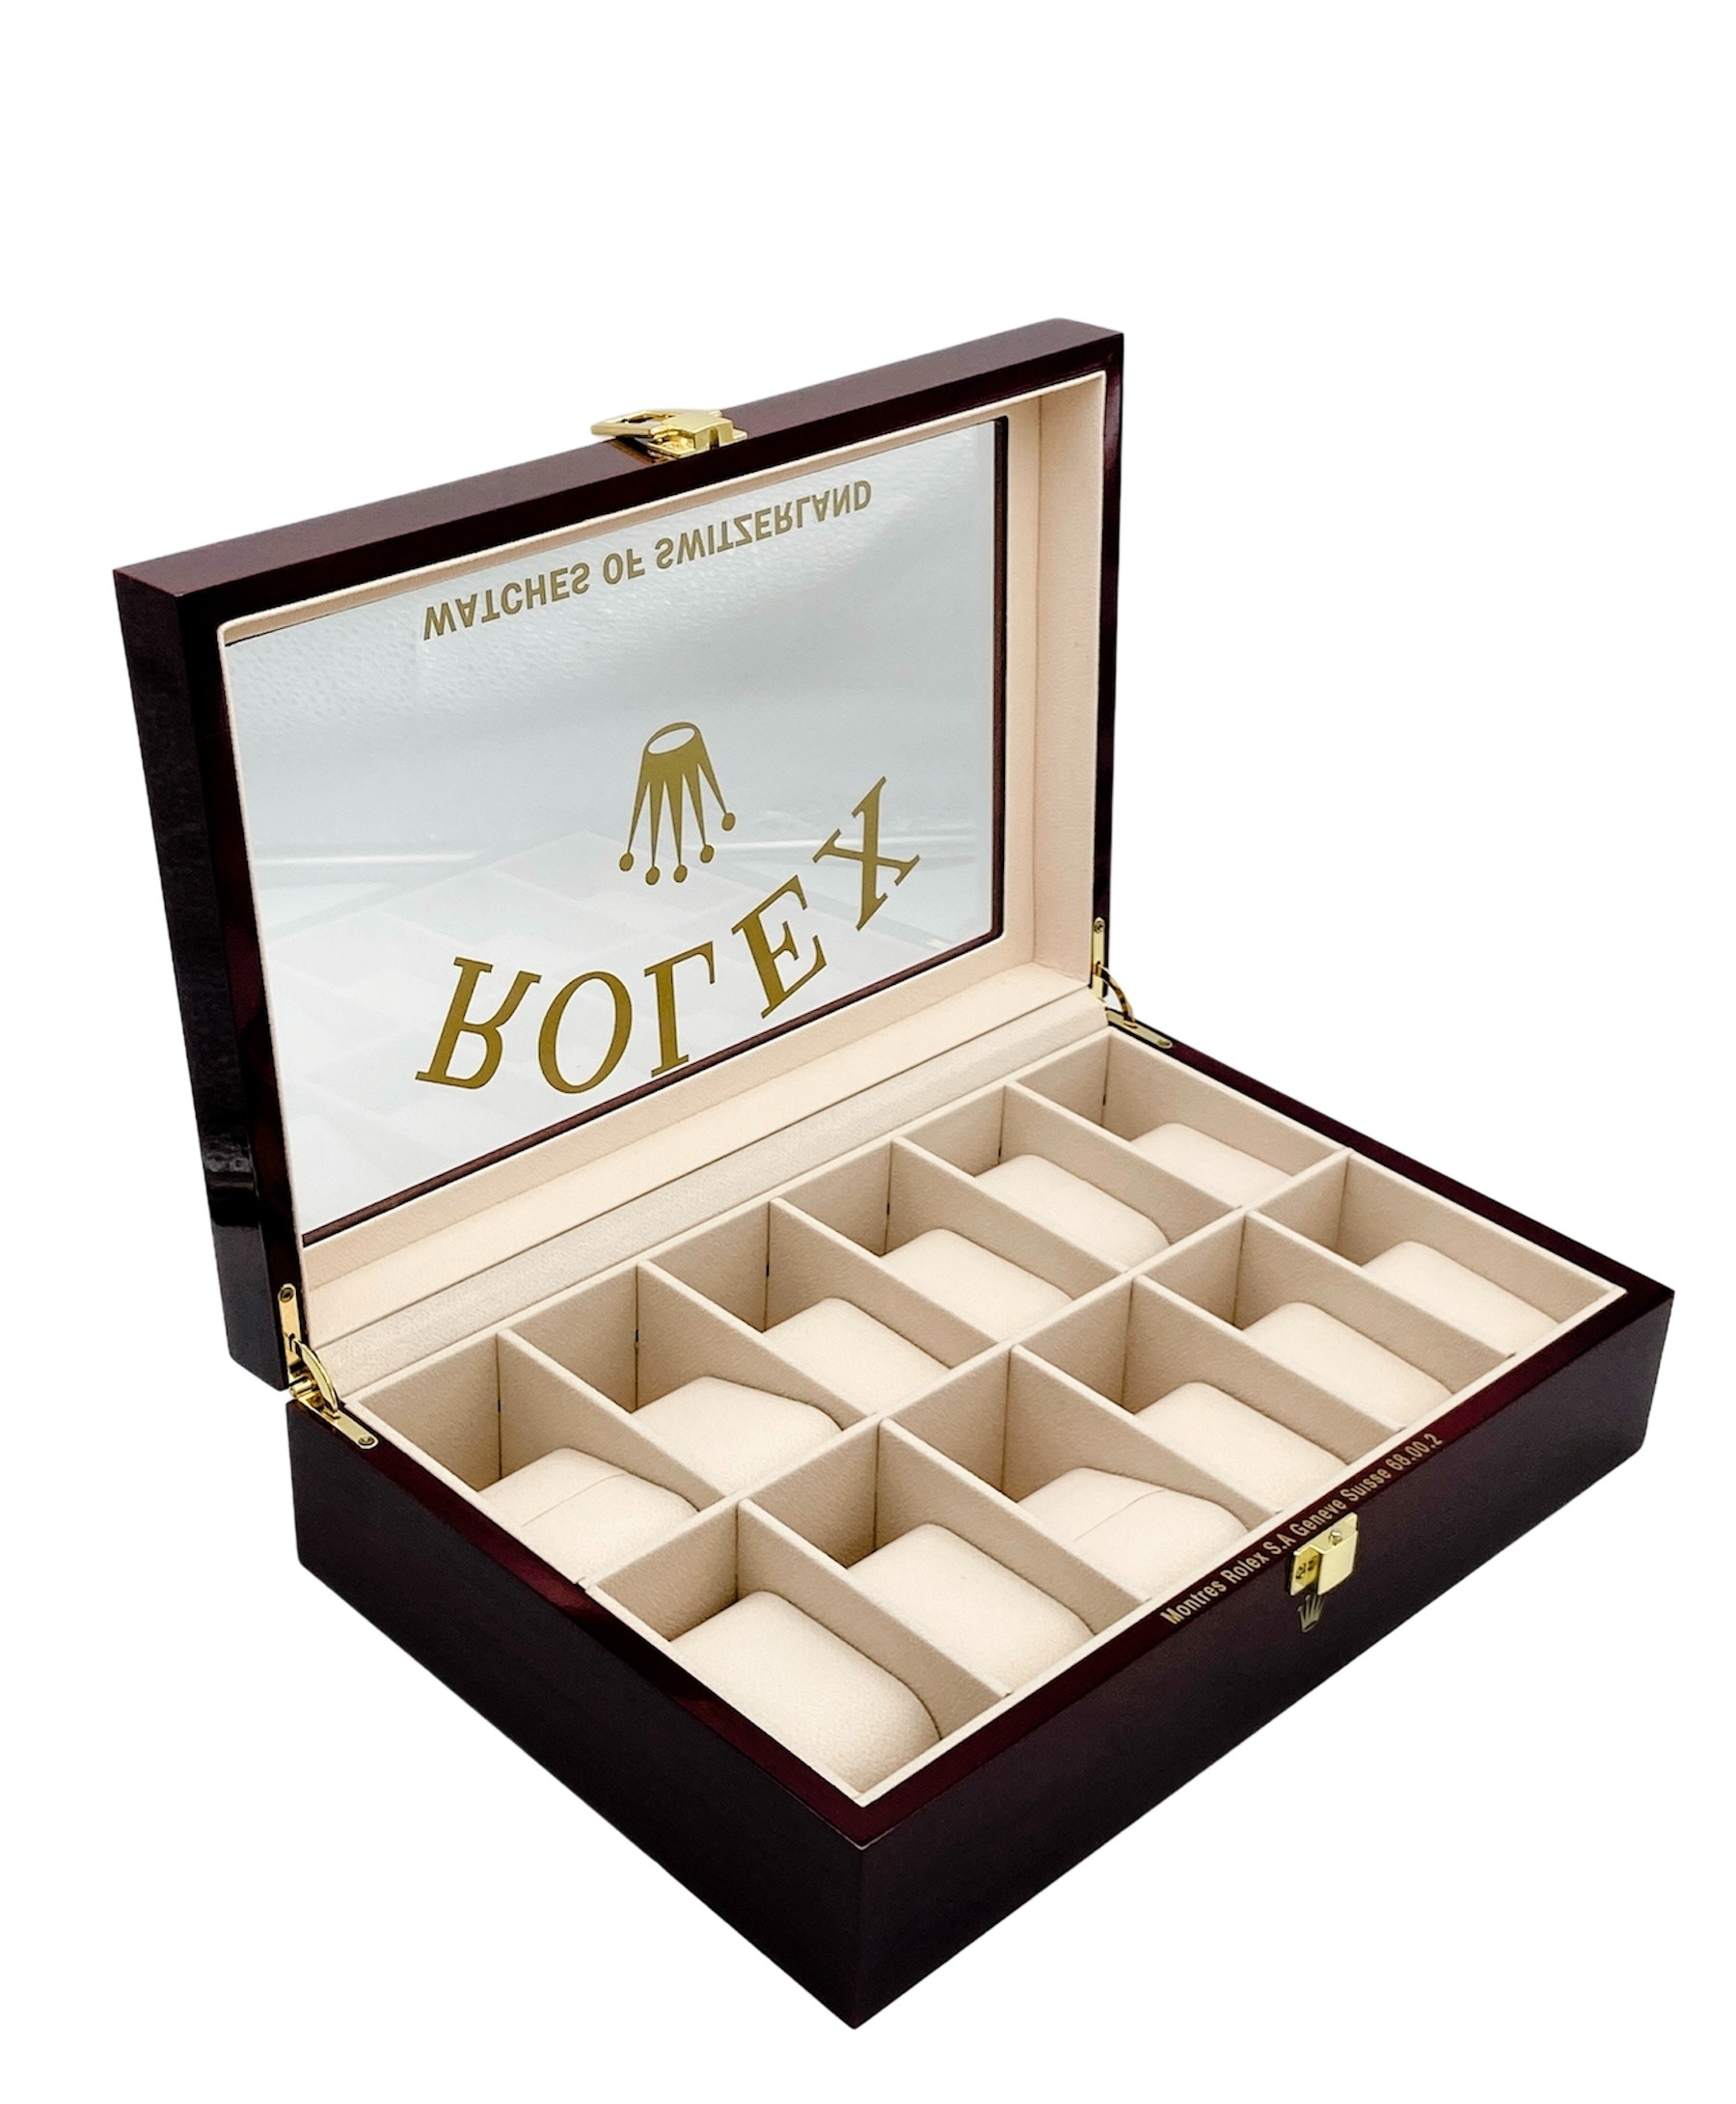 An Unused 12 Watch Display Case. Perfect for Rolex watches. 31.5 x 21.5 x 8.5cm. Rich Piano Finish. - Image 3 of 12